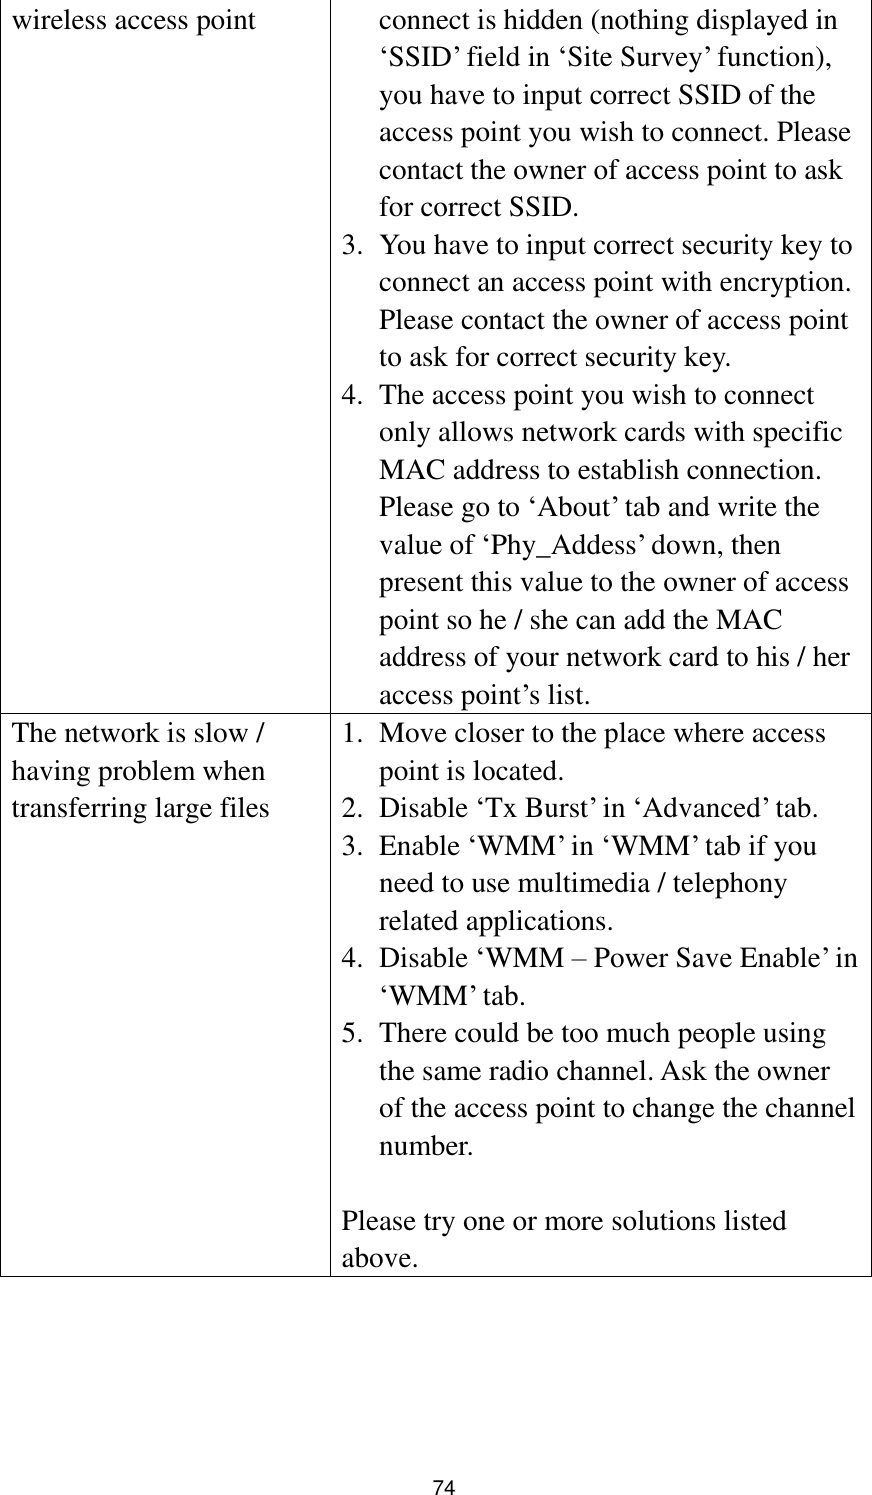  74 wireless access point connect is hidden (nothing displayed in „SSID‟ field in „Site Survey‟ function), you have to input correct SSID of the access point you wish to connect. Please contact the owner of access point to ask for correct SSID. 3. You have to input correct security key to connect an access point with encryption. Please contact the owner of access point to ask for correct security key. 4. The access point you wish to connect only allows network cards with specific MAC address to establish connection. Please go to „About‟ tab and write the value of „Phy_Addess‟ down, then present this value to the owner of access point so he / she can add the MAC address of your network card to his / her access point‟s list. The network is slow / having problem when transferring large files 1. Move closer to the place where access point is located. 2. Disable „Tx Burst‟ in „Advanced‟ tab. 3. Enable „WMM‟ in „WMM‟ tab if you need to use multimedia / telephony related applications. 4. Disable „WMM – Power Save Enable‟ in „WMM‟ tab. 5. There could be too much people using the same radio channel. Ask the owner of the access point to change the channel number.  Please try one or more solutions listed above.     